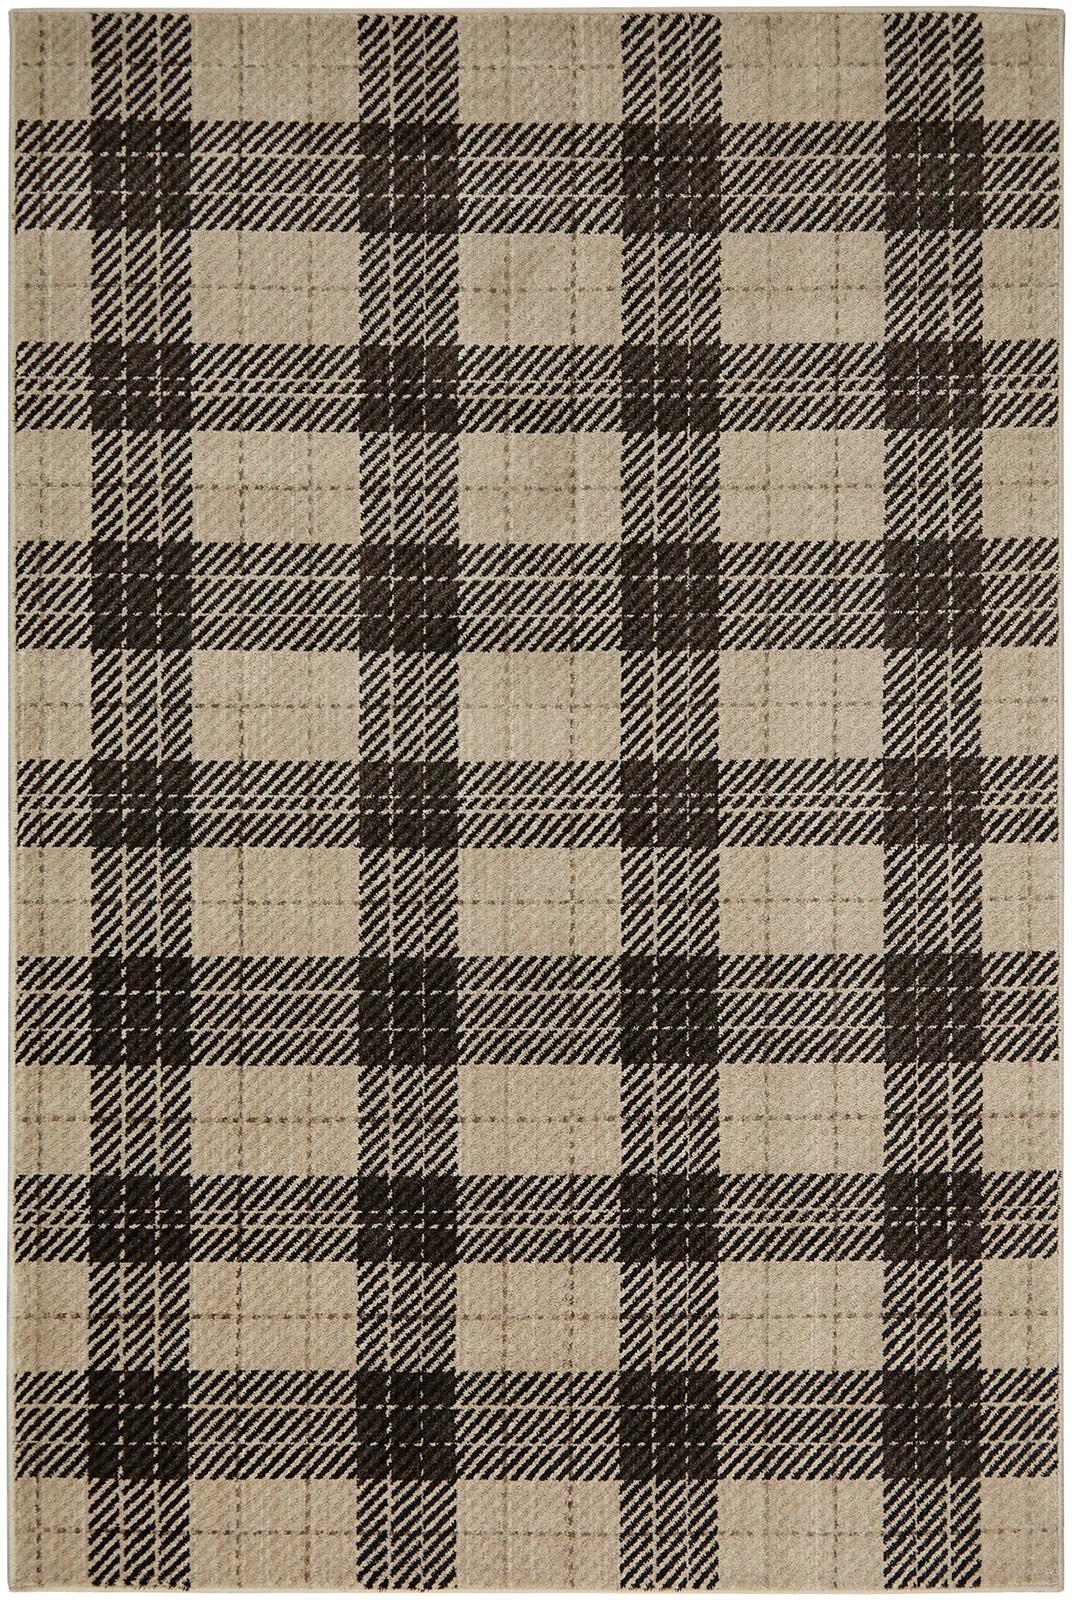 Contemporary Area Rug RG8184-S Kendrick RG8184-S in Charcoal 